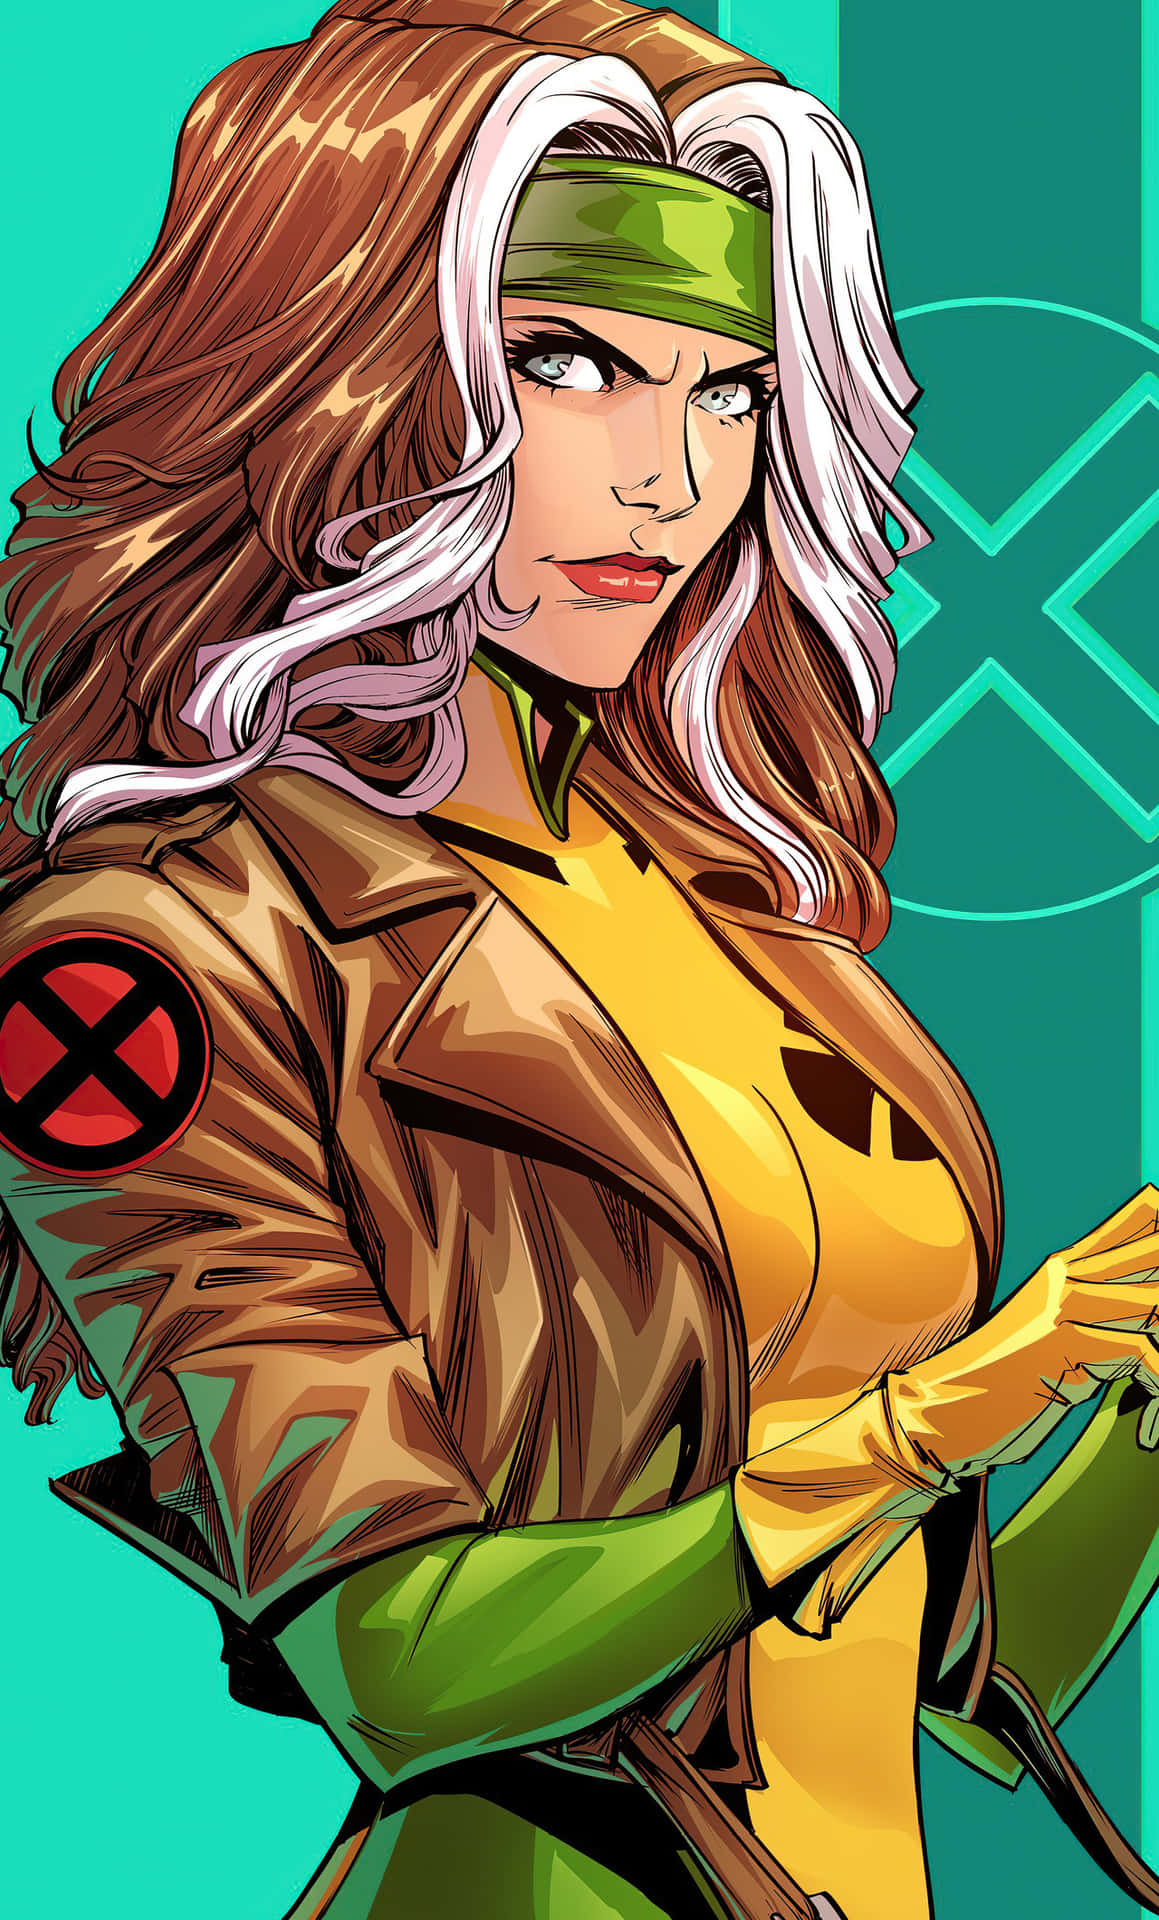 A Comic Book Character With Long Hair And Green Clothes Background